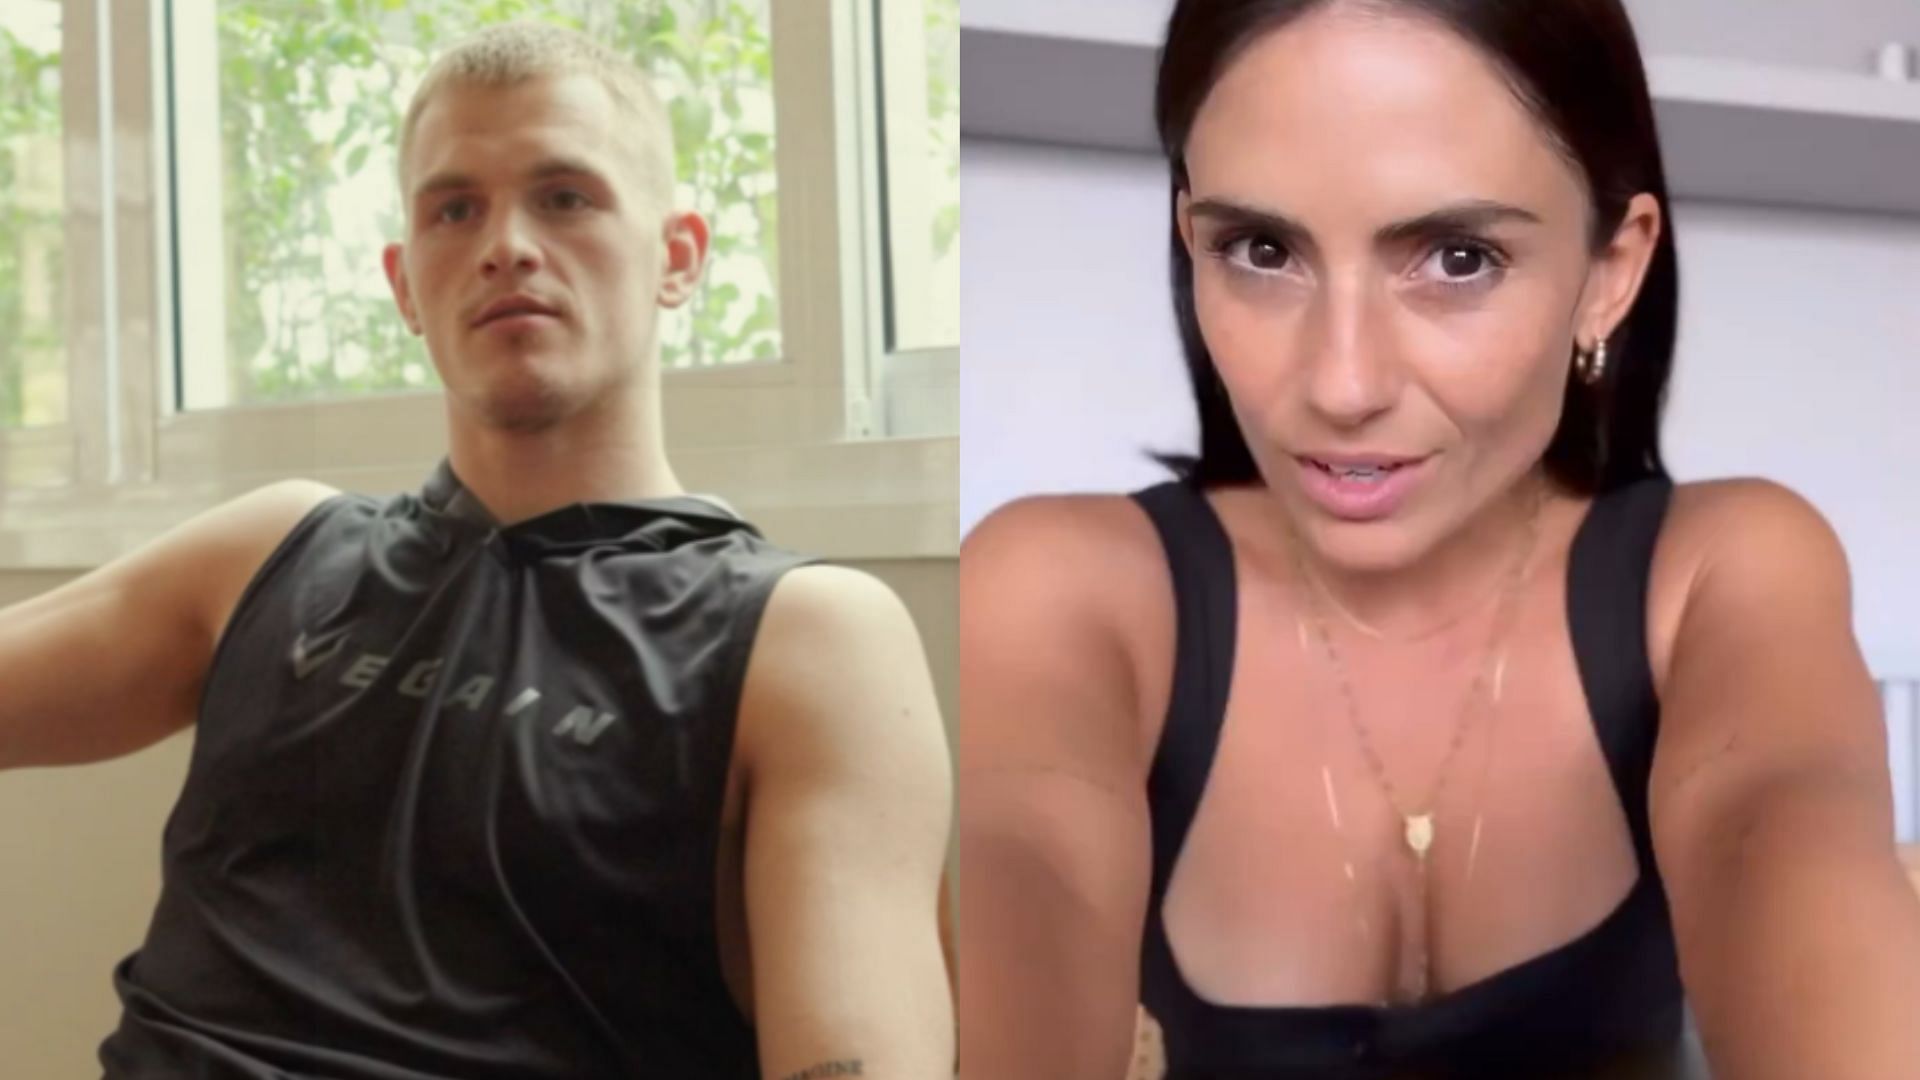 UFC veteran criticizes Ian Garry (left) and his wife Layla Anna-Lee (right) [Images courtesy of @iangarry on Instagram]